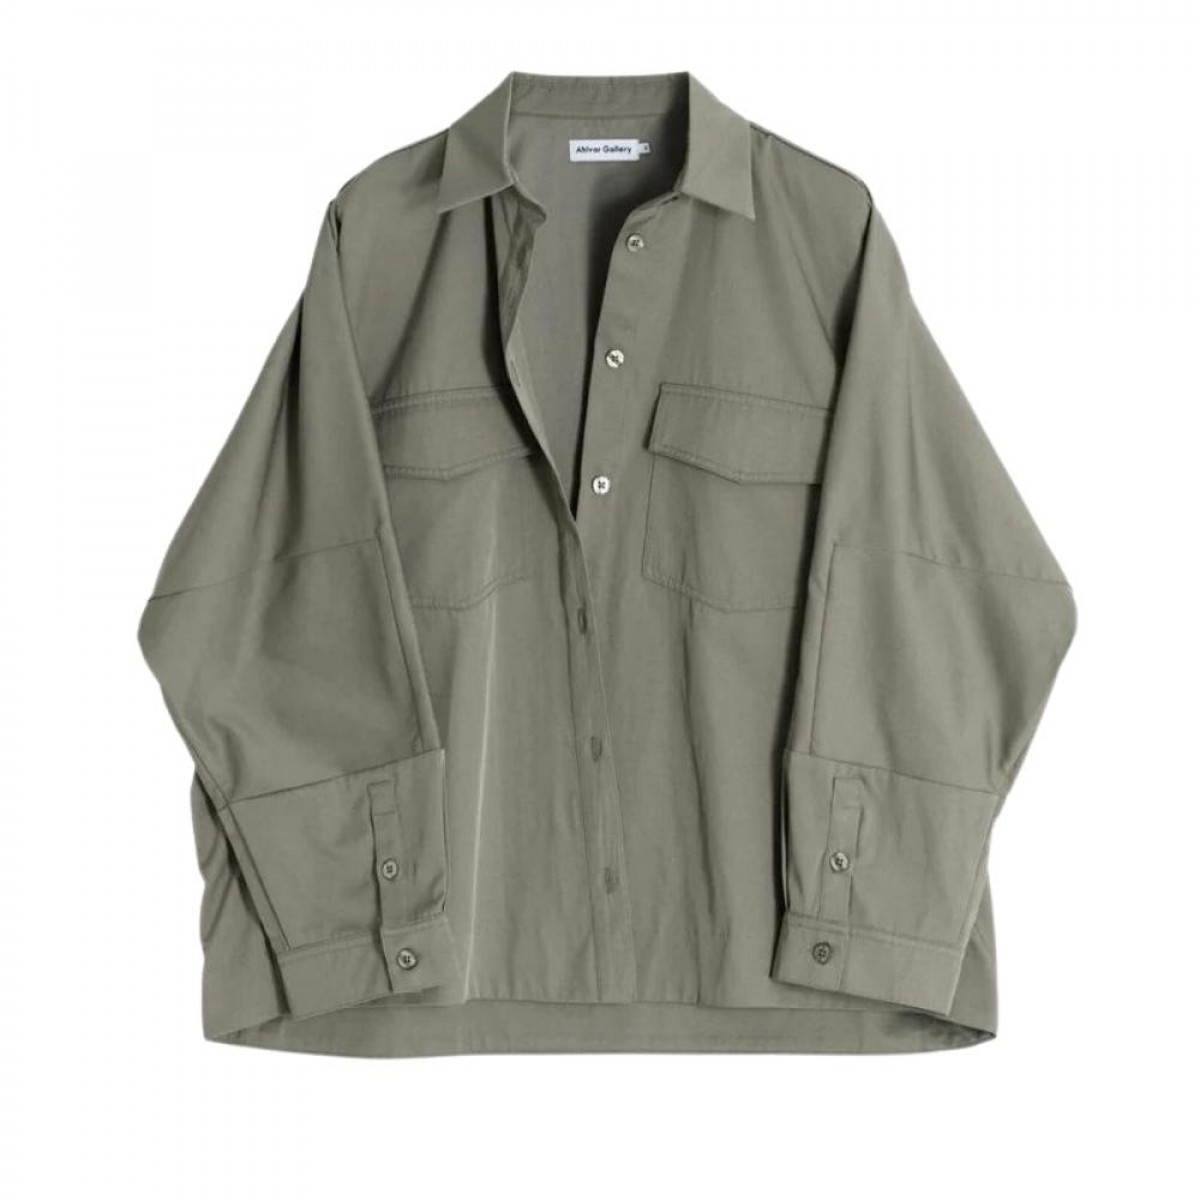 kaia over shirt - military green - front